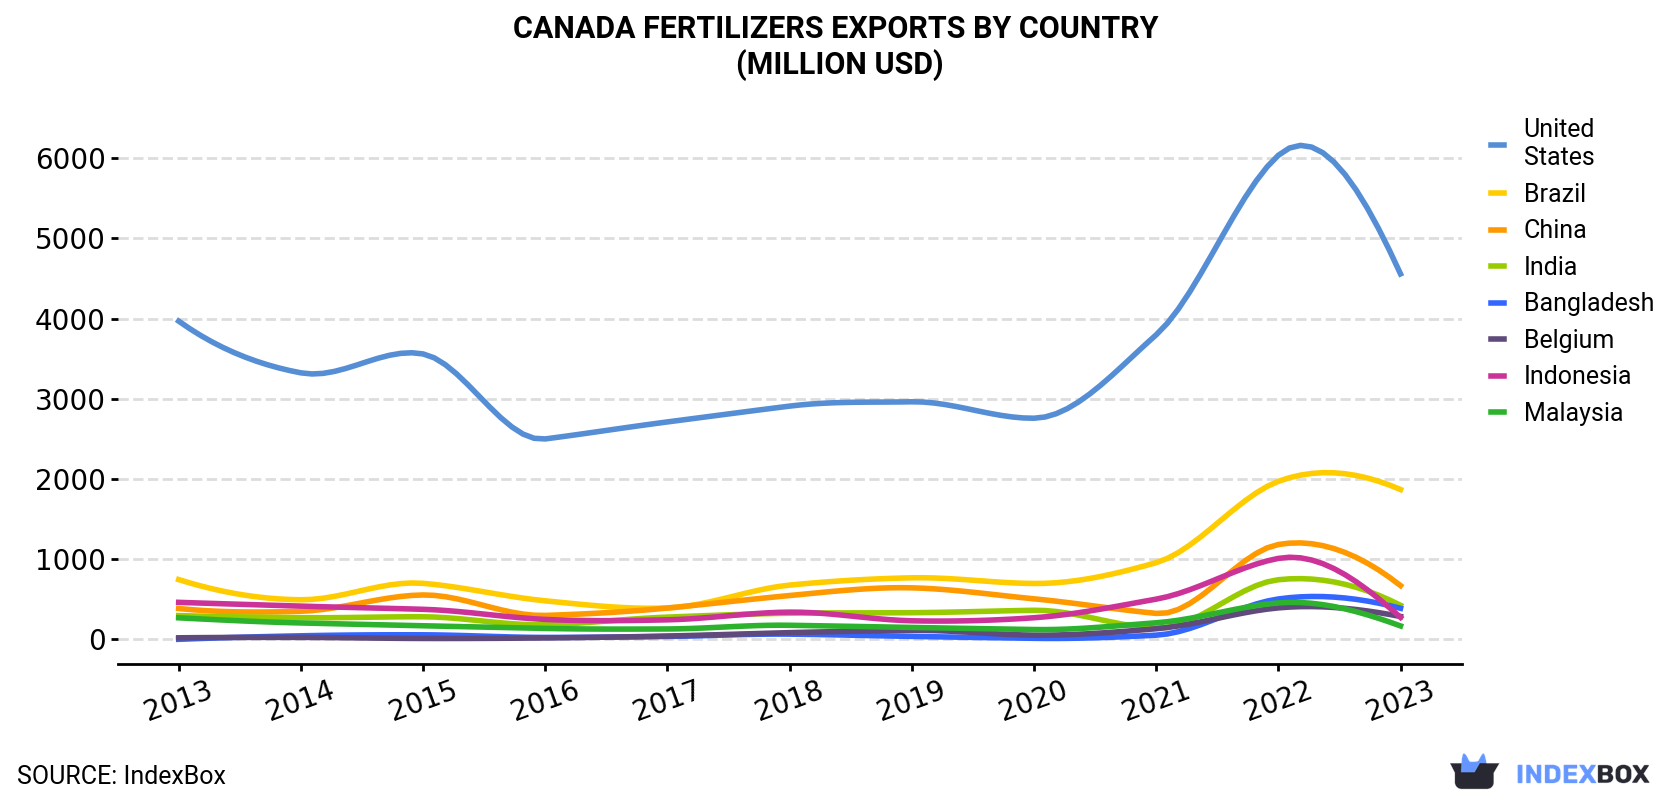 Canada Fertilizers Exports By Country (Million USD)